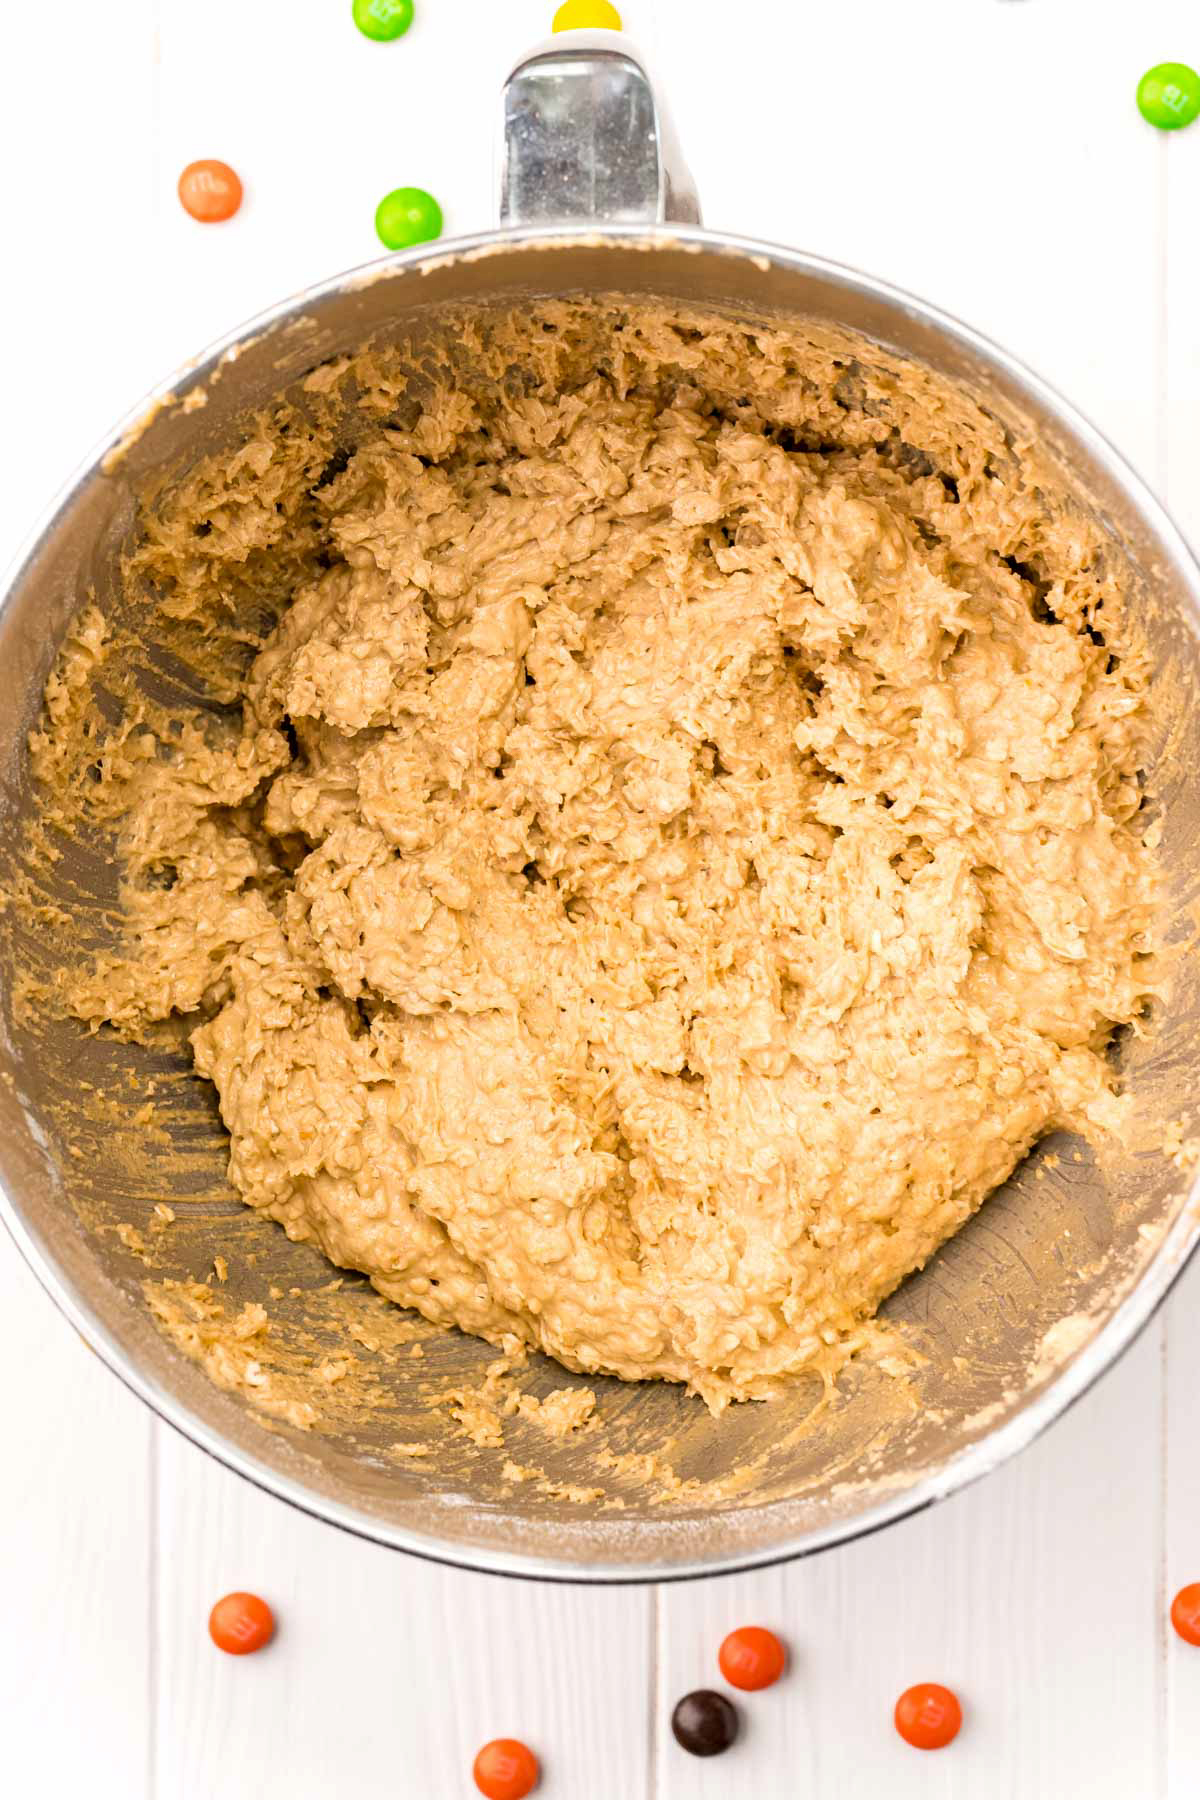 monster cookie dough without all the mix-ins